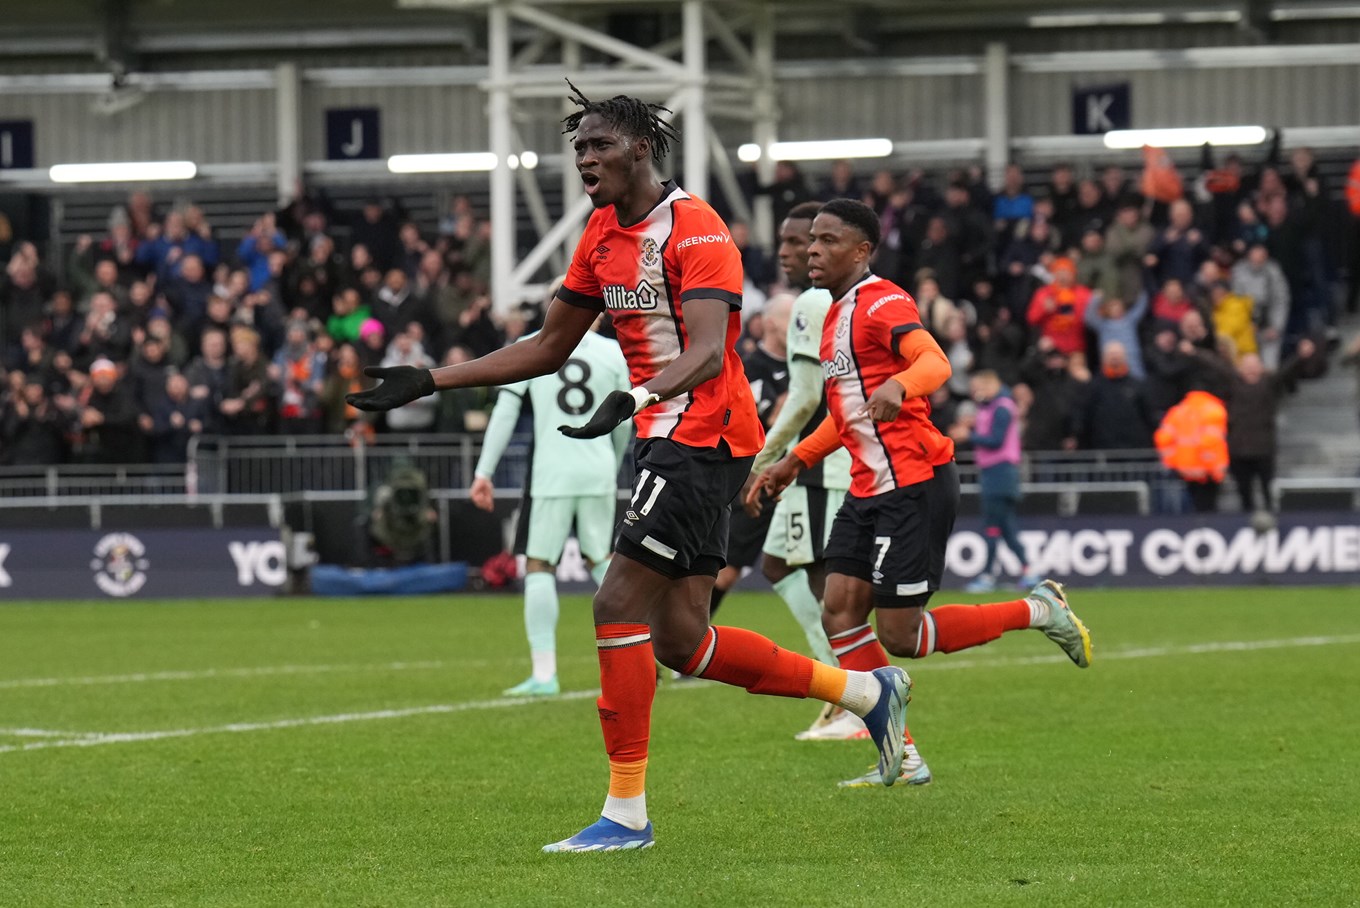 Elijah Adebayo hyping the crowd up after scoring Luton's second goal against Chelsea.